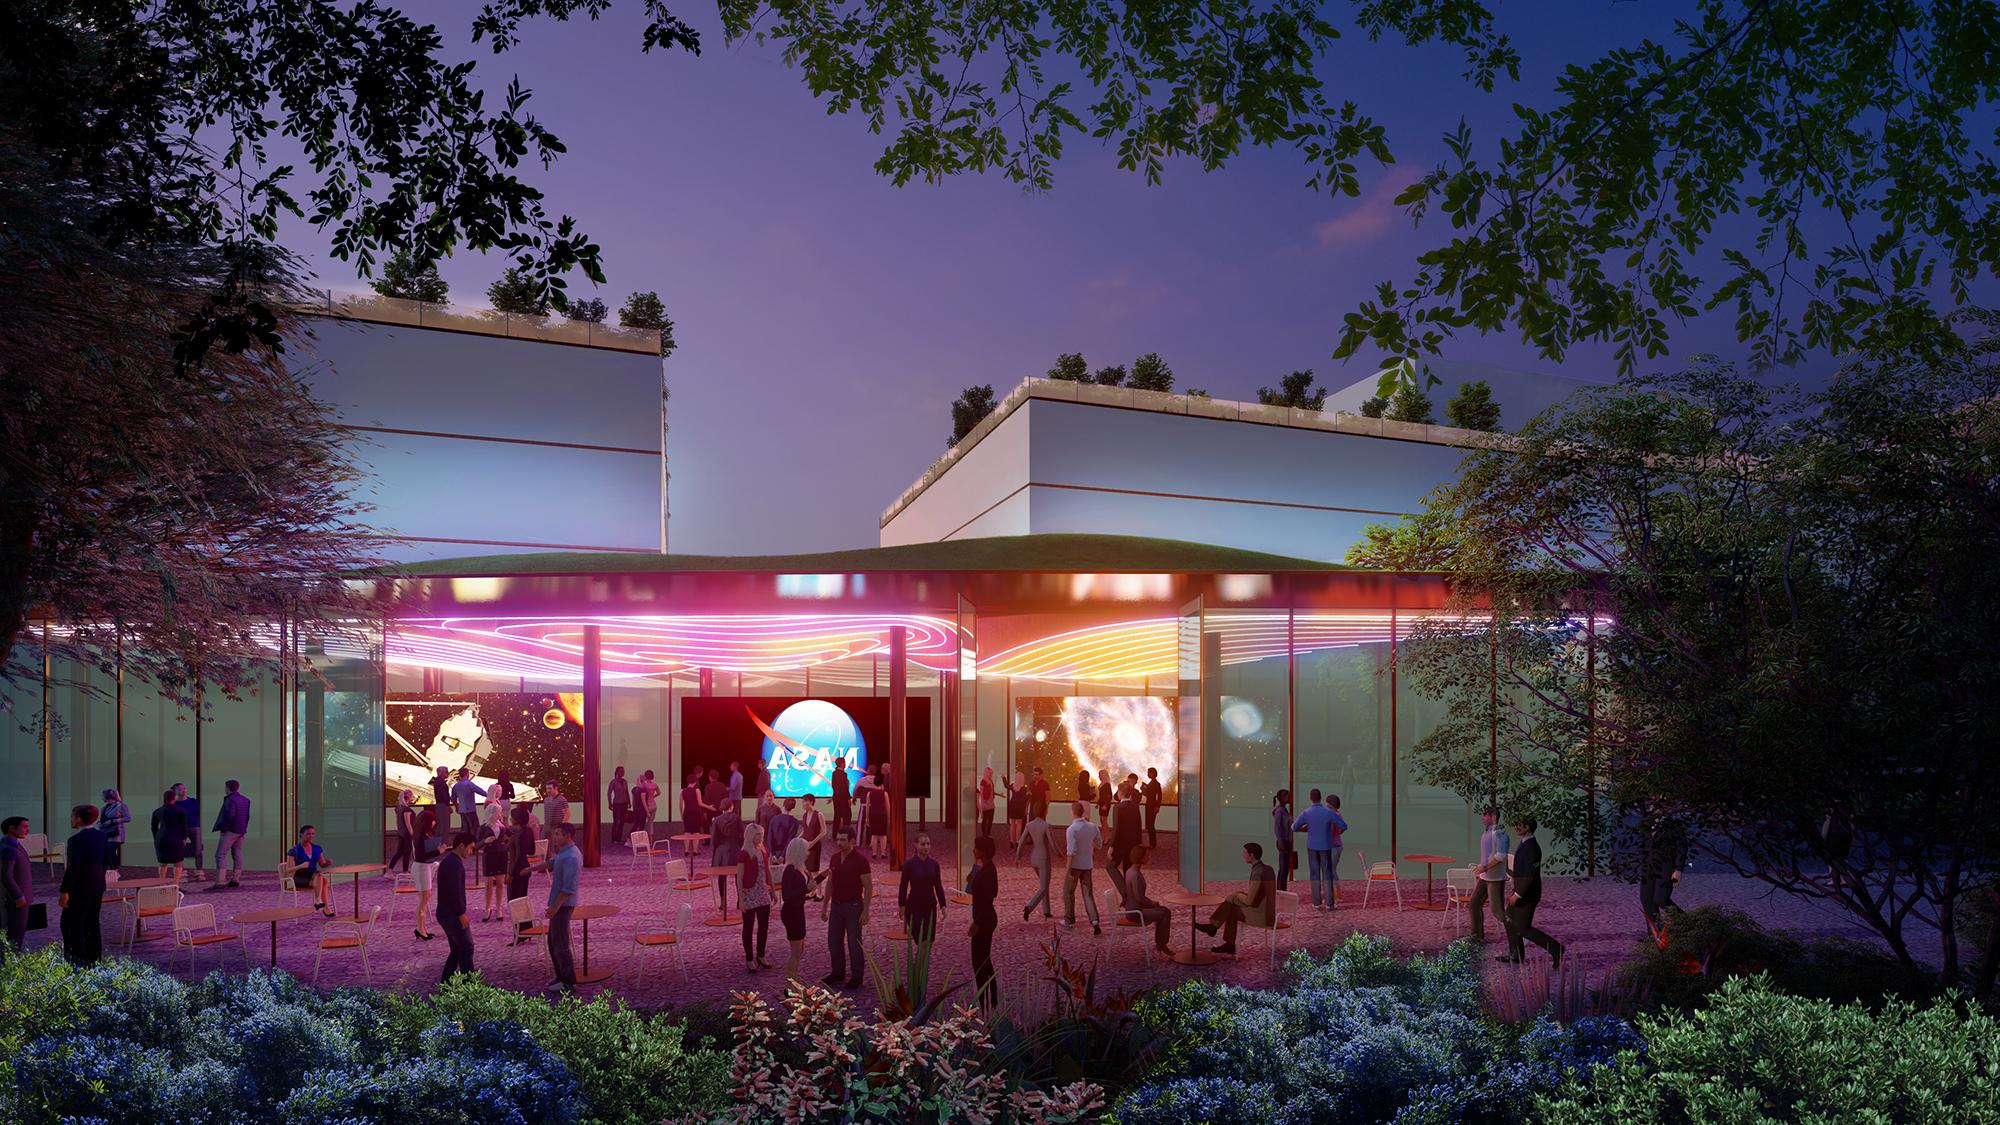 Rendering of a pavilion brightly lit in pink lights with the NASA logo in the middle